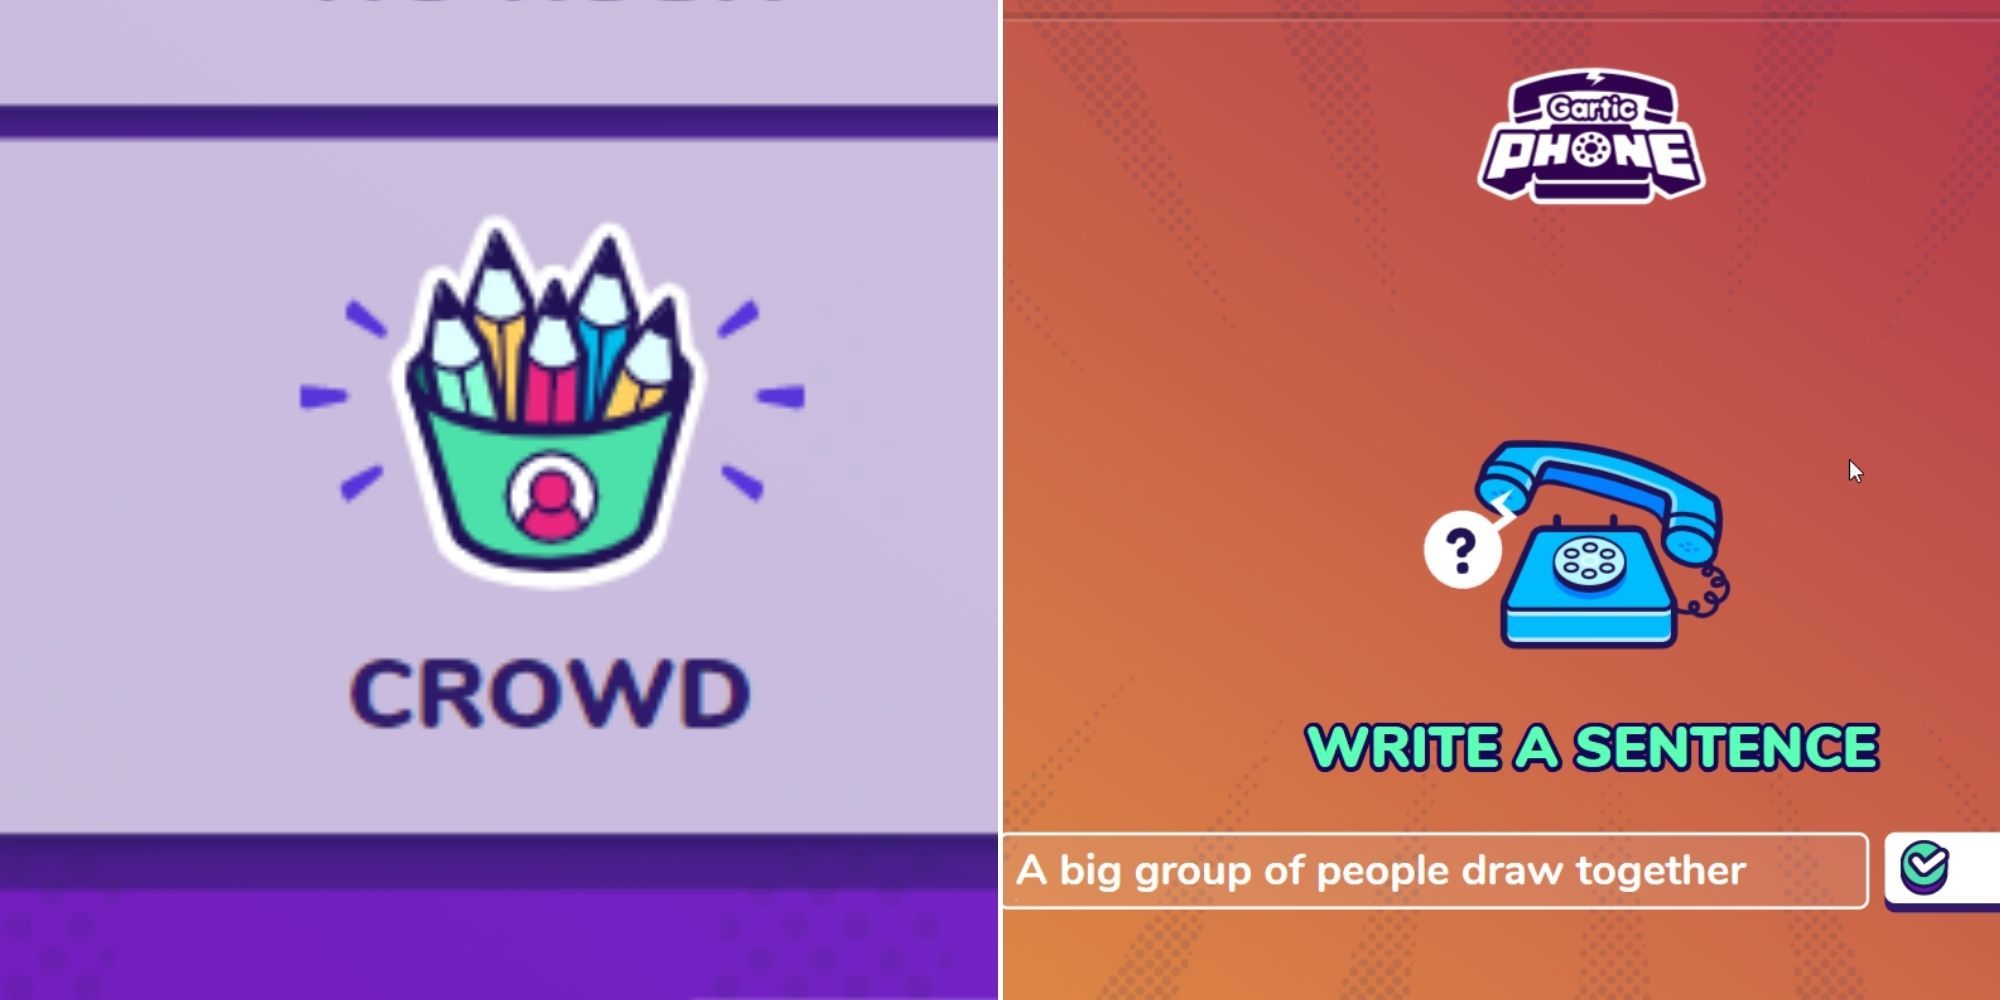 Gartic Phone - Crowd Logo - A player writing a sentence prompt 